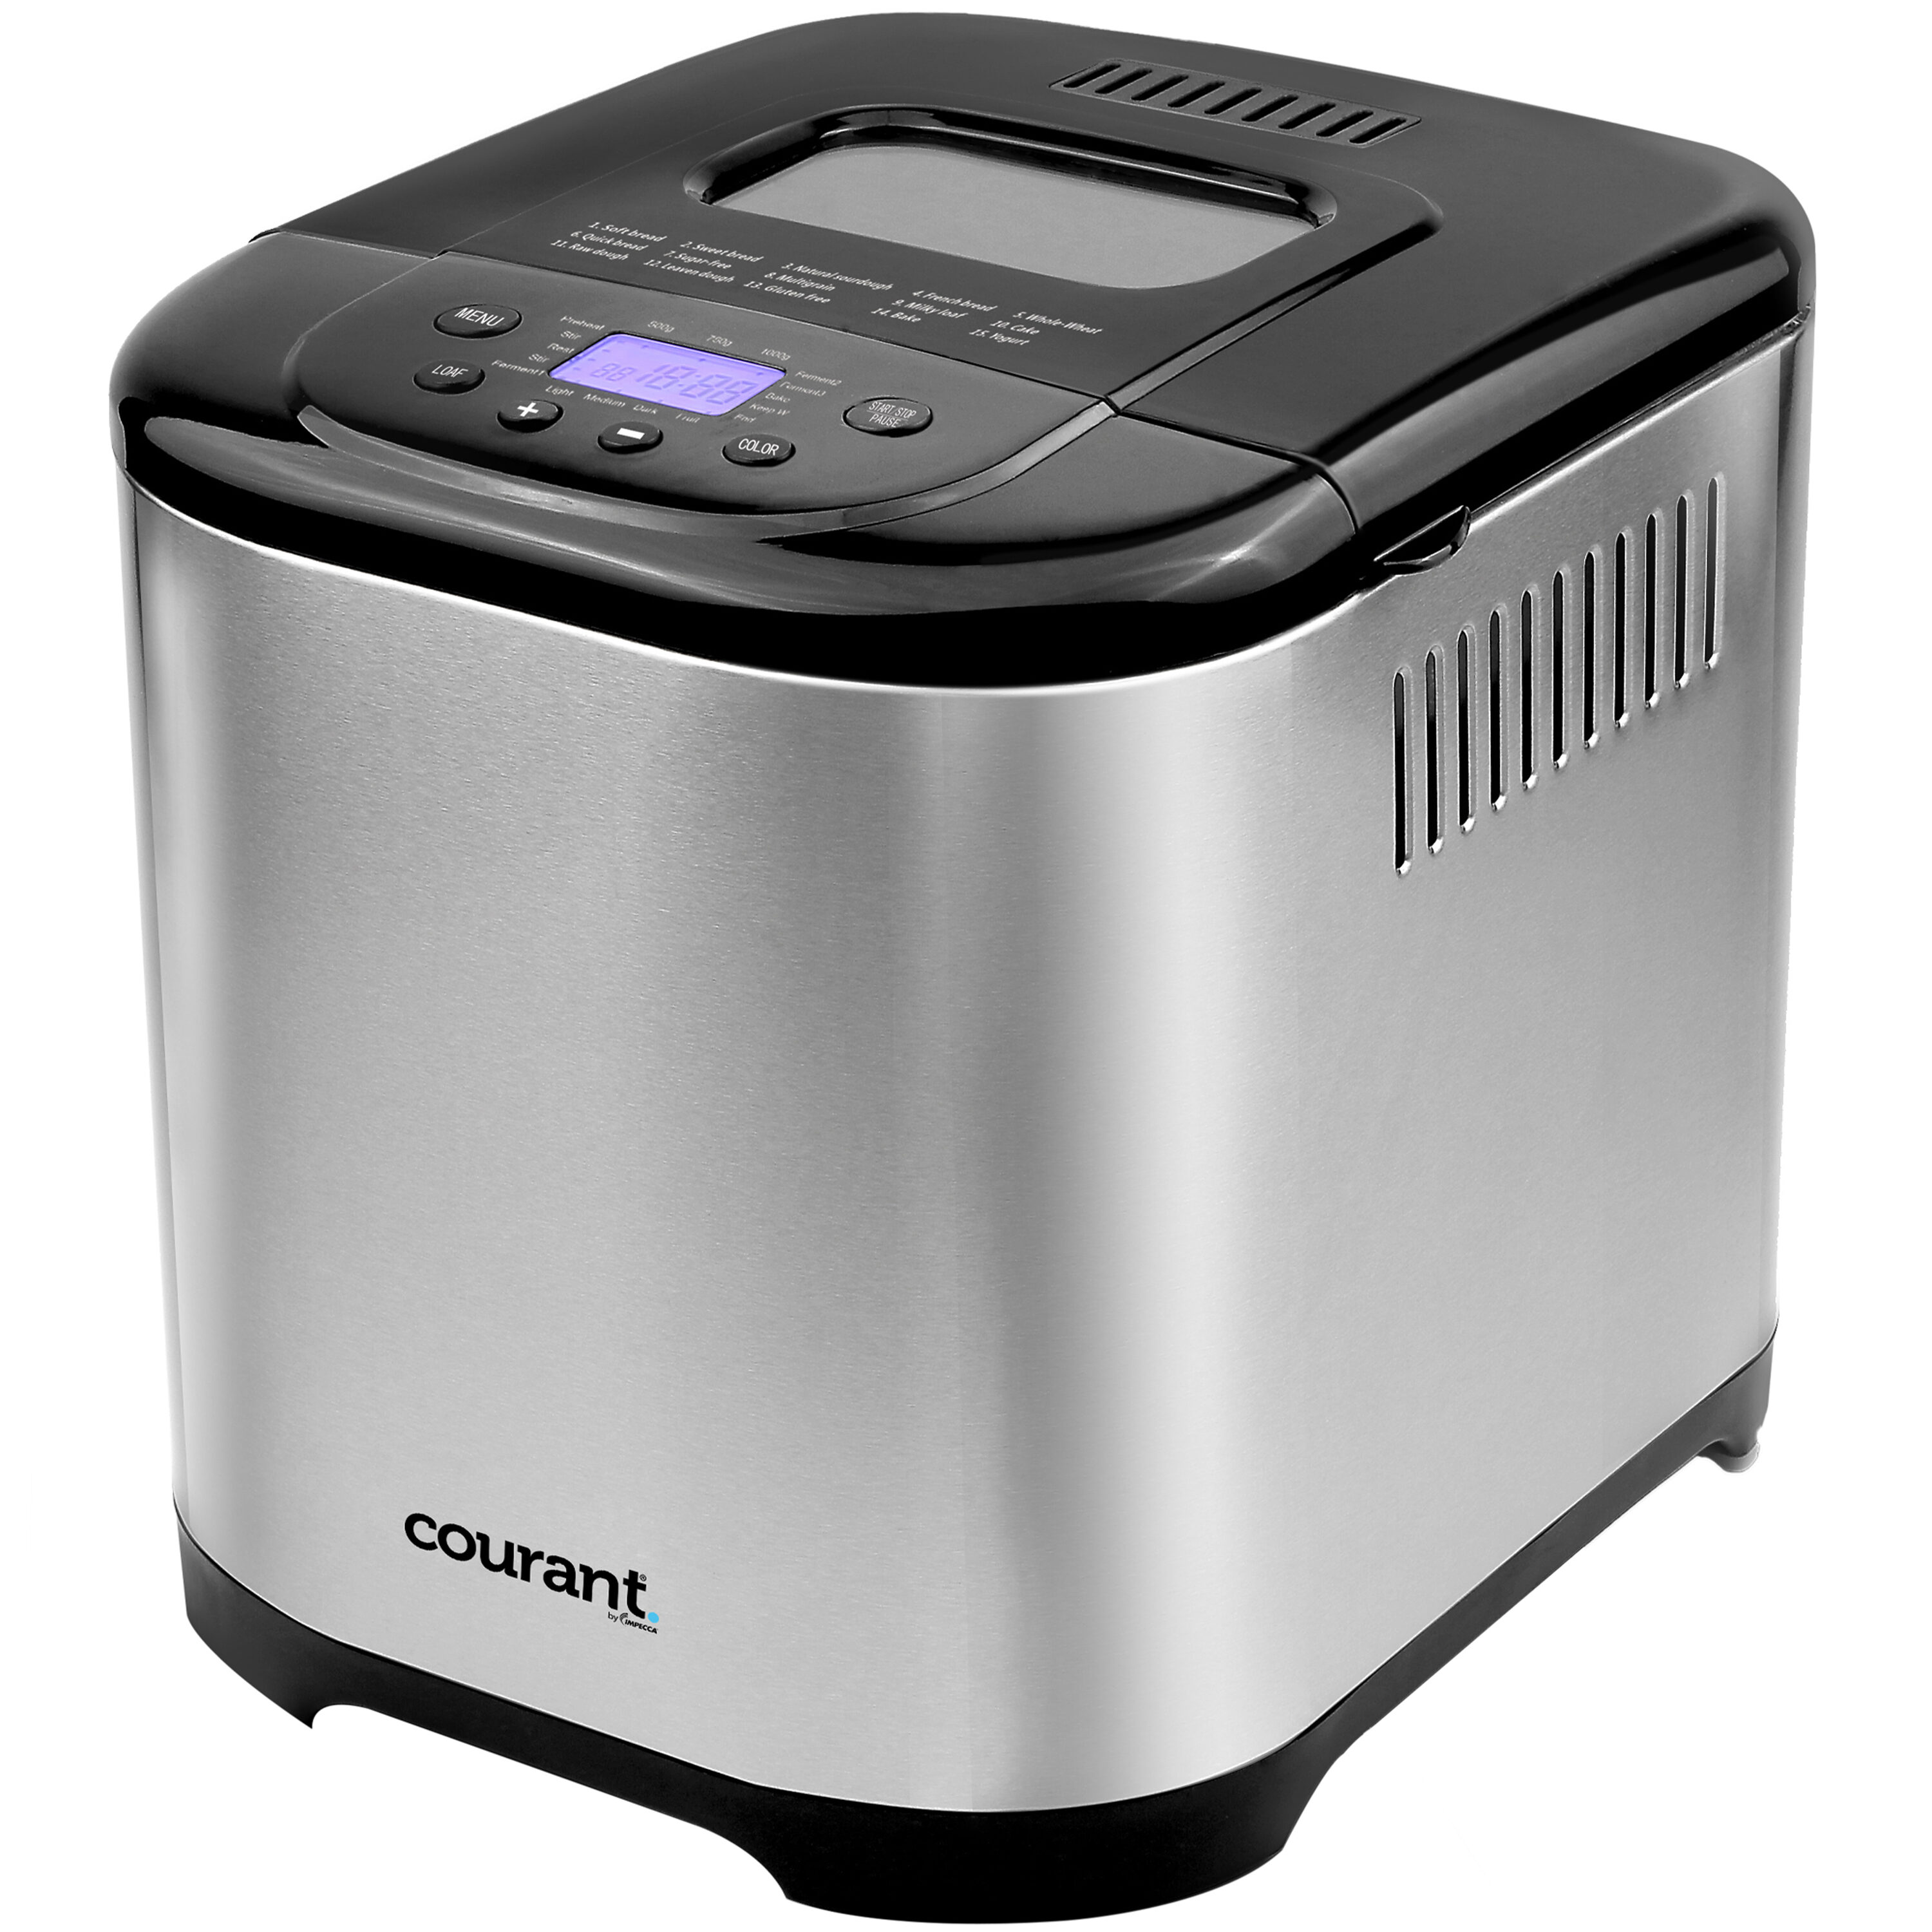 Elite Gourmet EBM8103B Programmable Bread Maker Machine 3 Loaf Sizes, 19  Menu Functions Gluten Free White Wheat Rye French and more, 2 Lbs, Black